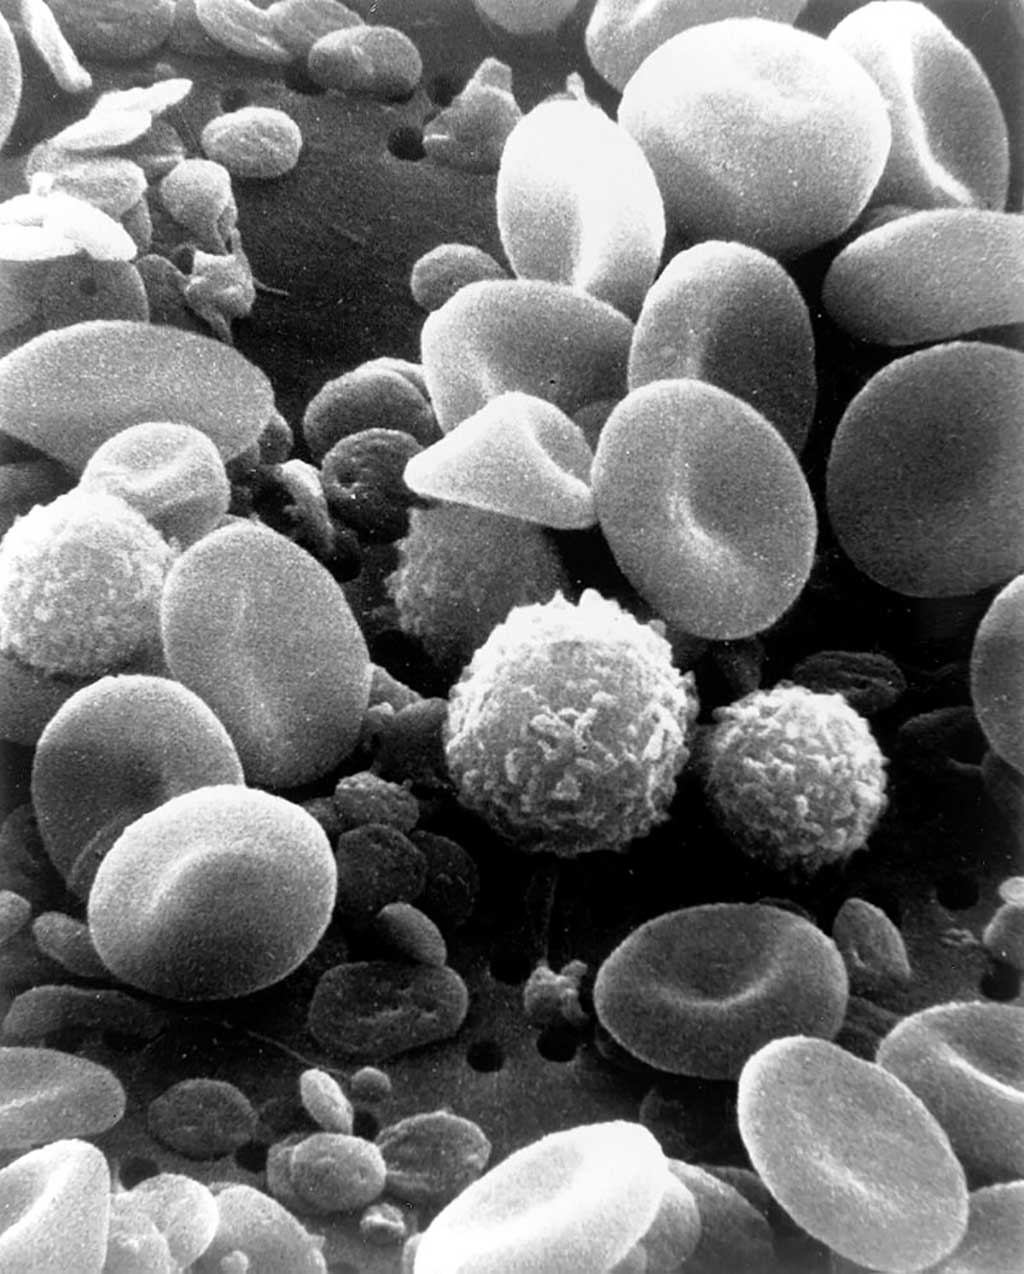 Image: A scanning electron microscope image of normal circulating human blood showing red blood cells, several types of white blood cells including lymphocytes, a monocyte, a neutrophil and many small disc-shaped platelets (Photo courtesy of [U.S.] National Cancer Institute)